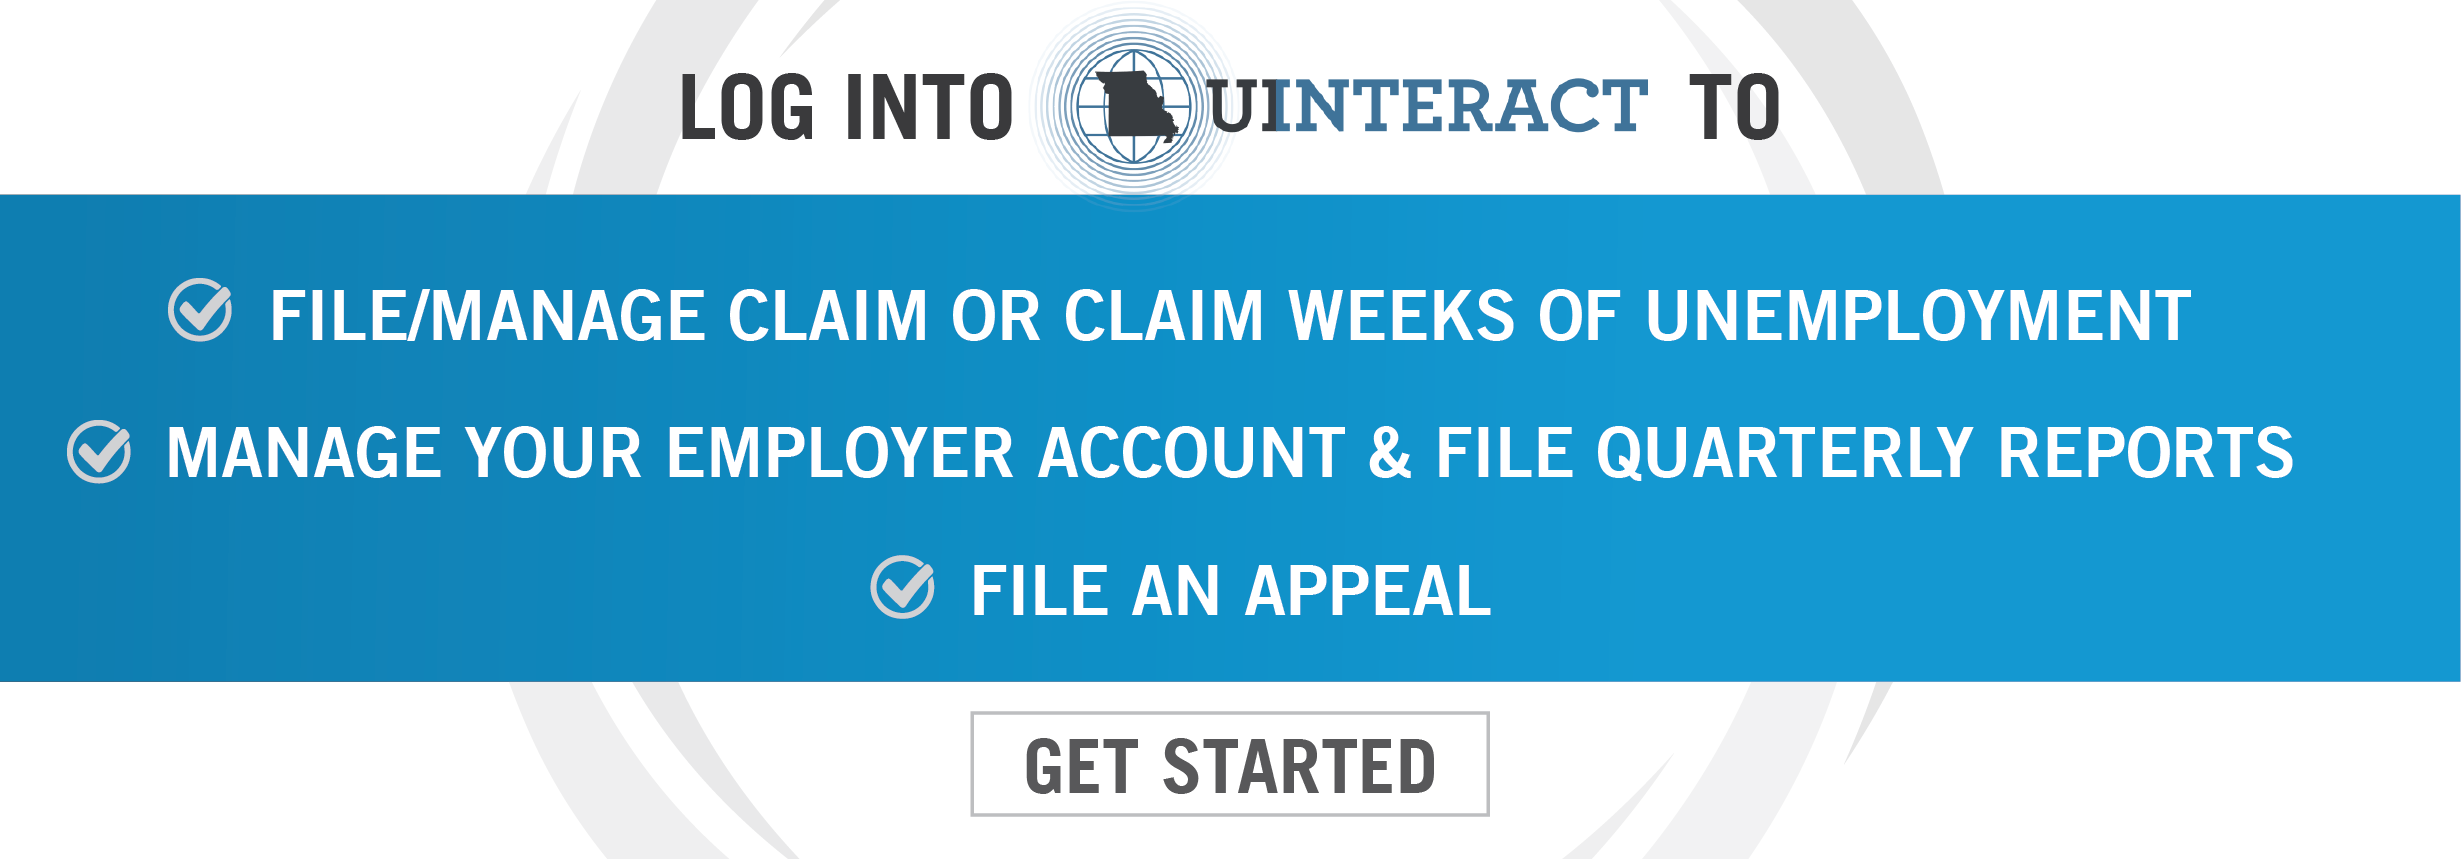 Log into UInteract to file/manage claim or claim weeks of unemployment. Manage your employer account and file quarterly reports. Or to file an appeal. Click here to get started.